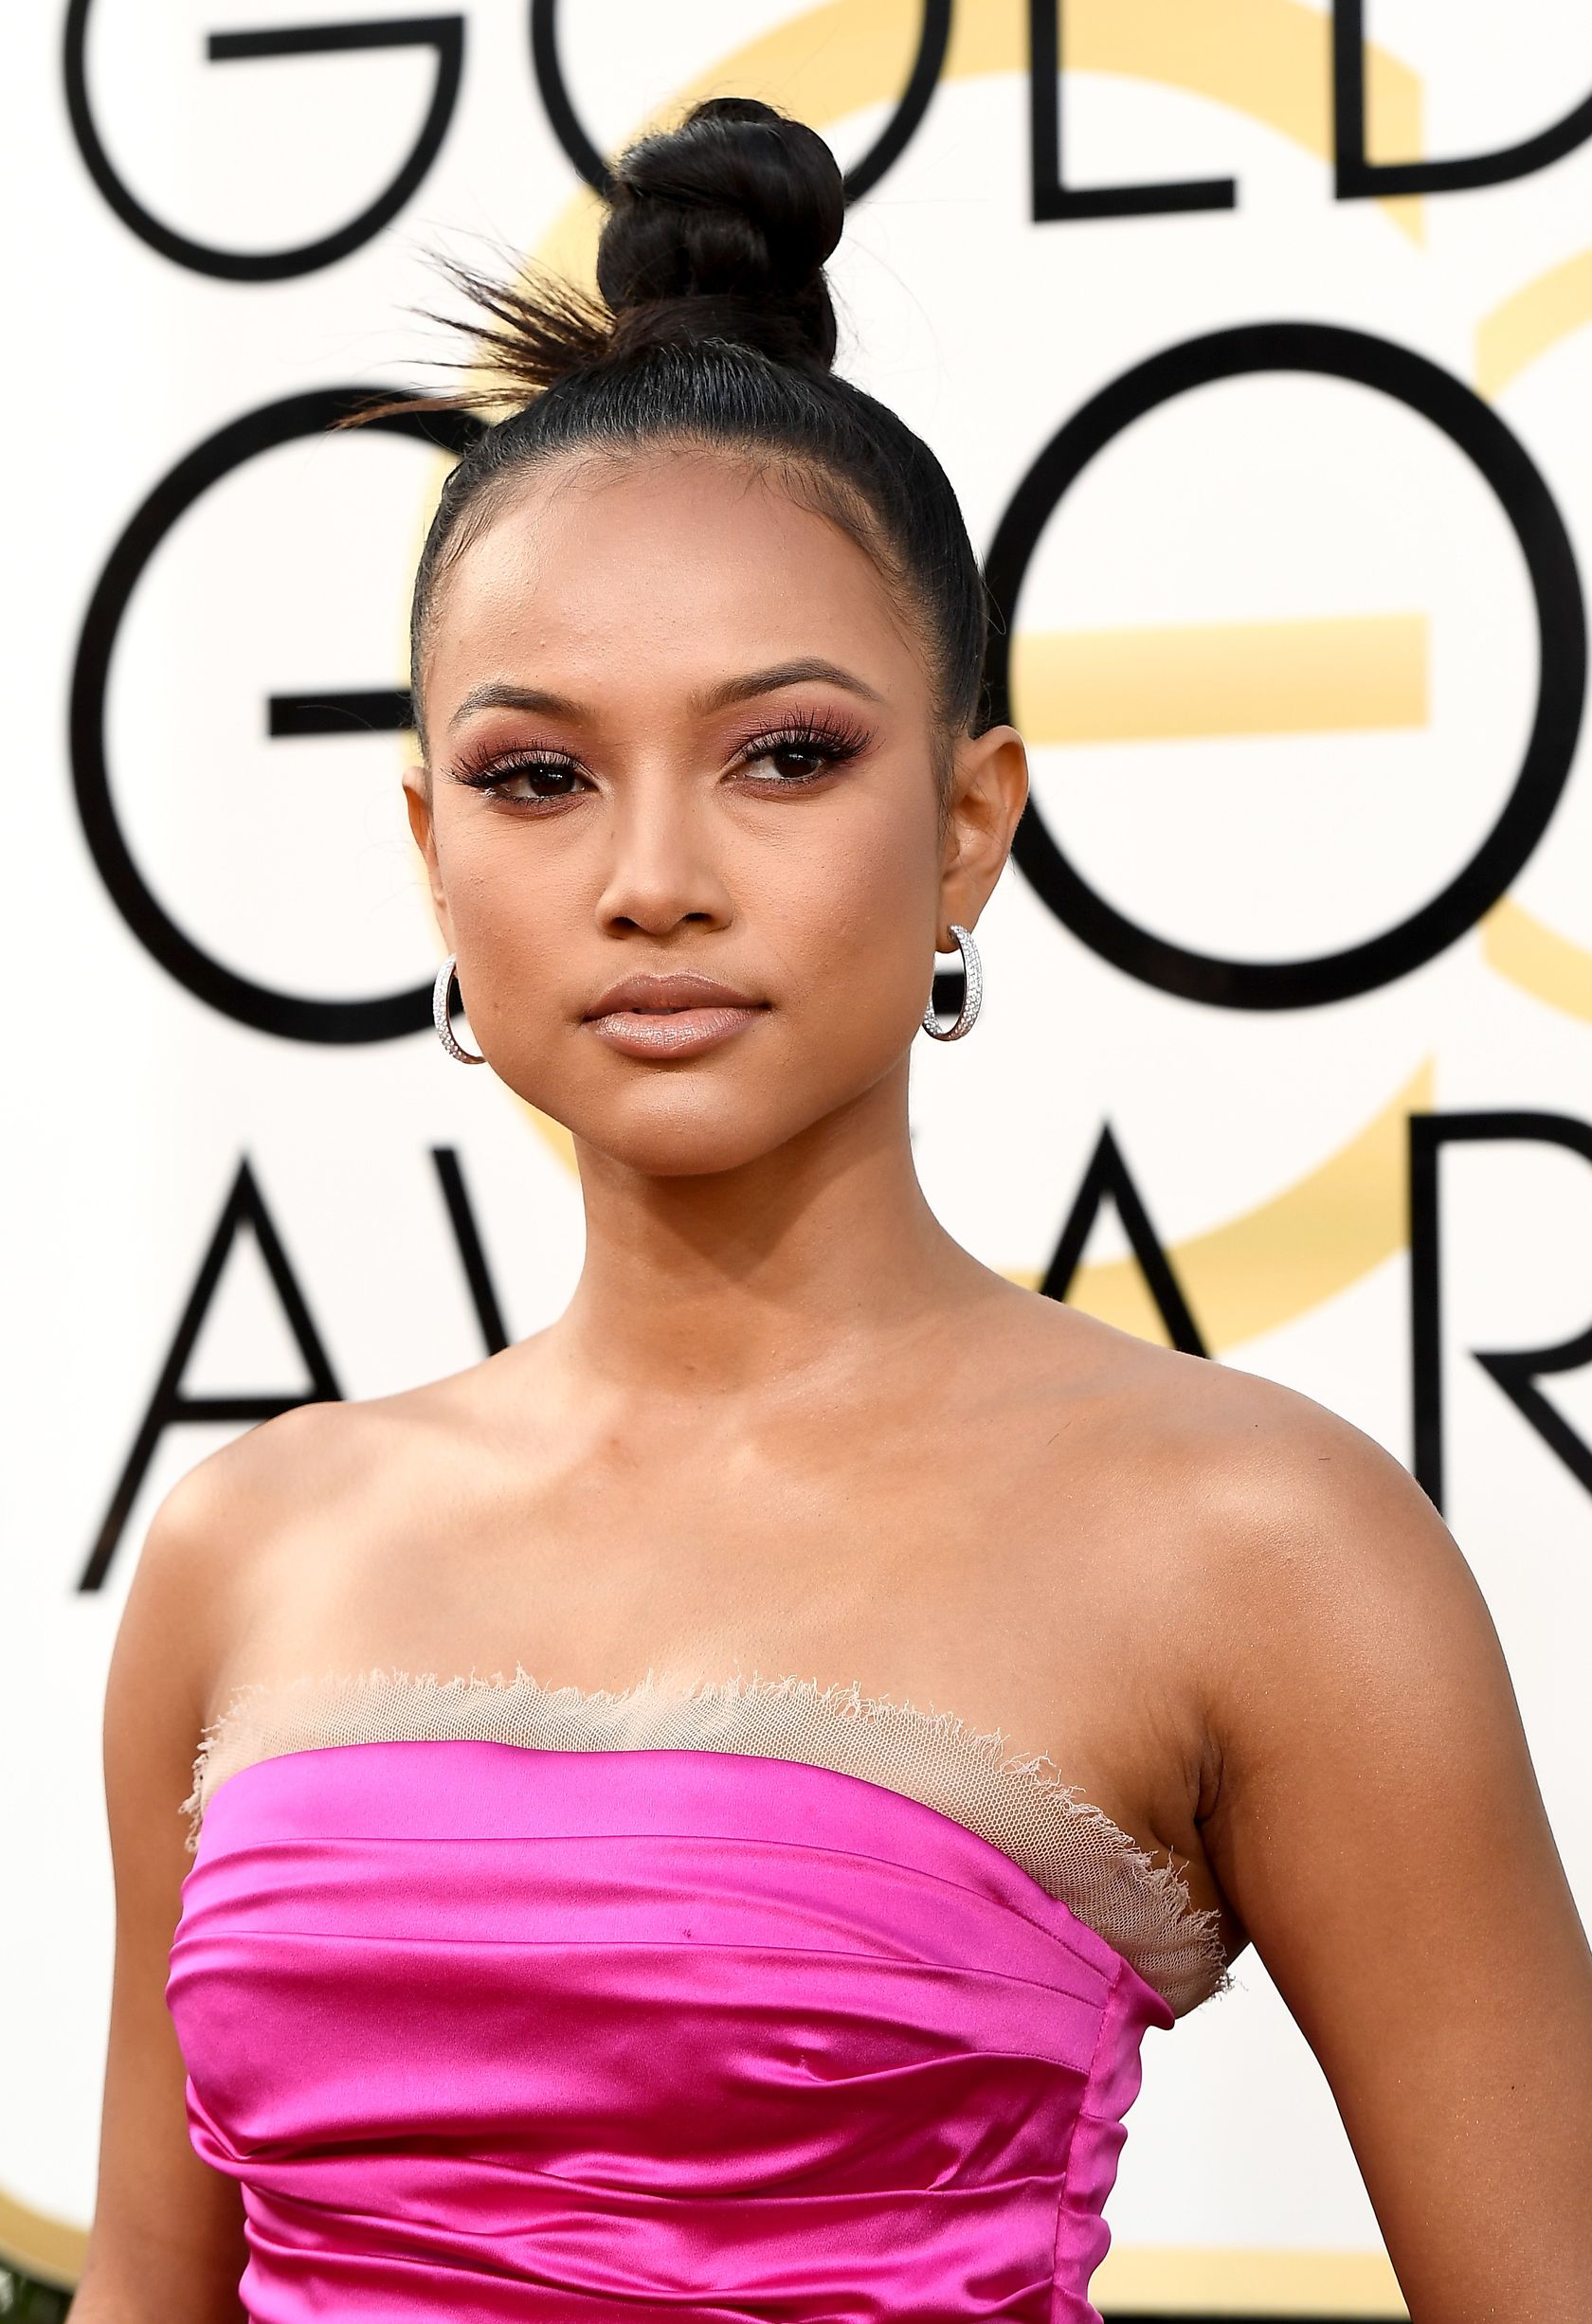 The 33-year old daughter of father Devon Minters and mother Cindy Adamson Karrueche Tran in 2022 photo. Karrueche Tran earned a  million dollar salary - leaving the net worth at 0.9 million in 2022